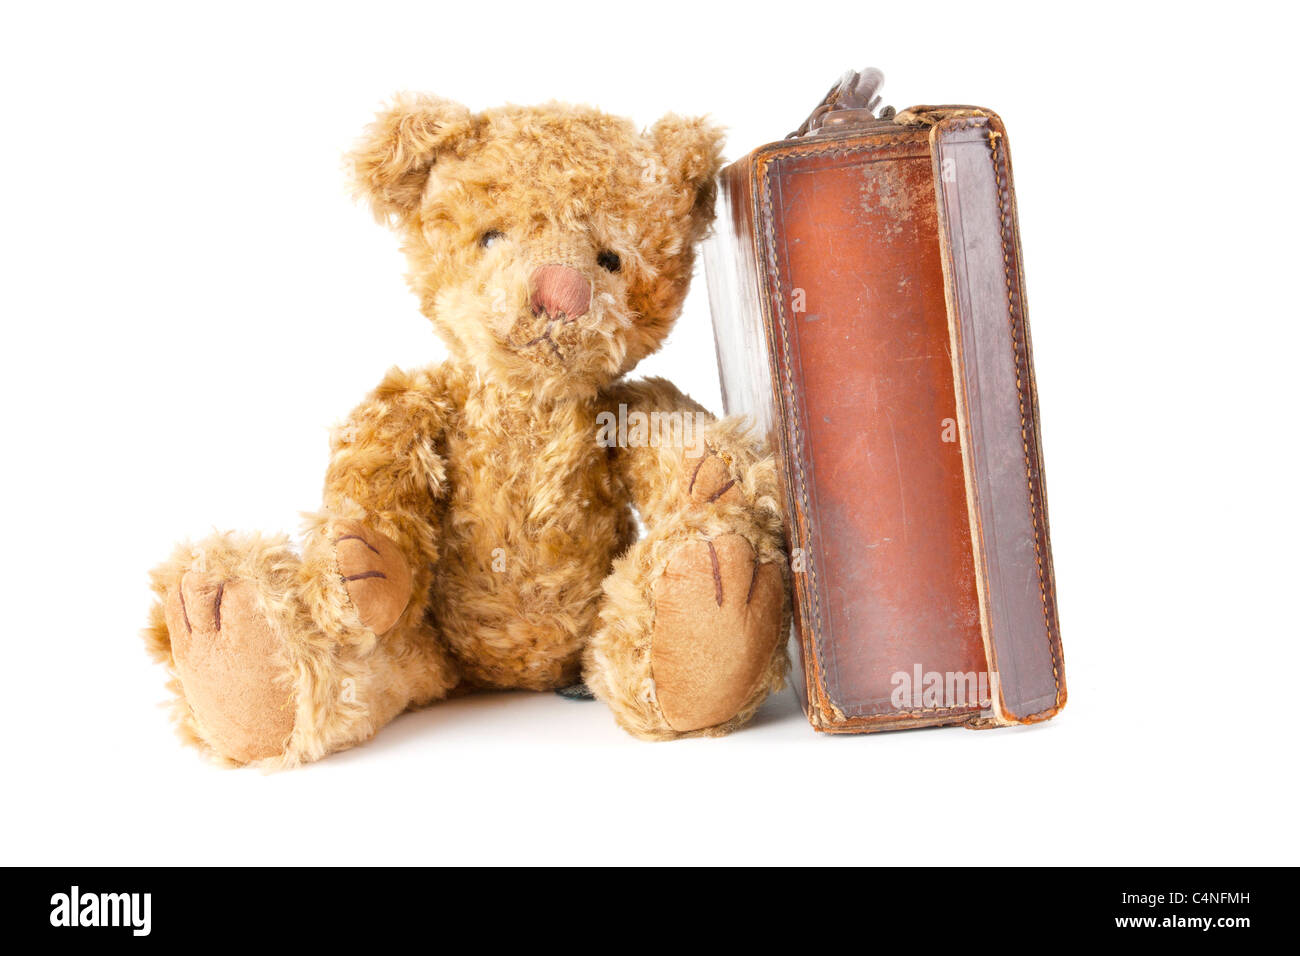 childs teddy bear sitting next to an old vintage suitcase Stock Photo